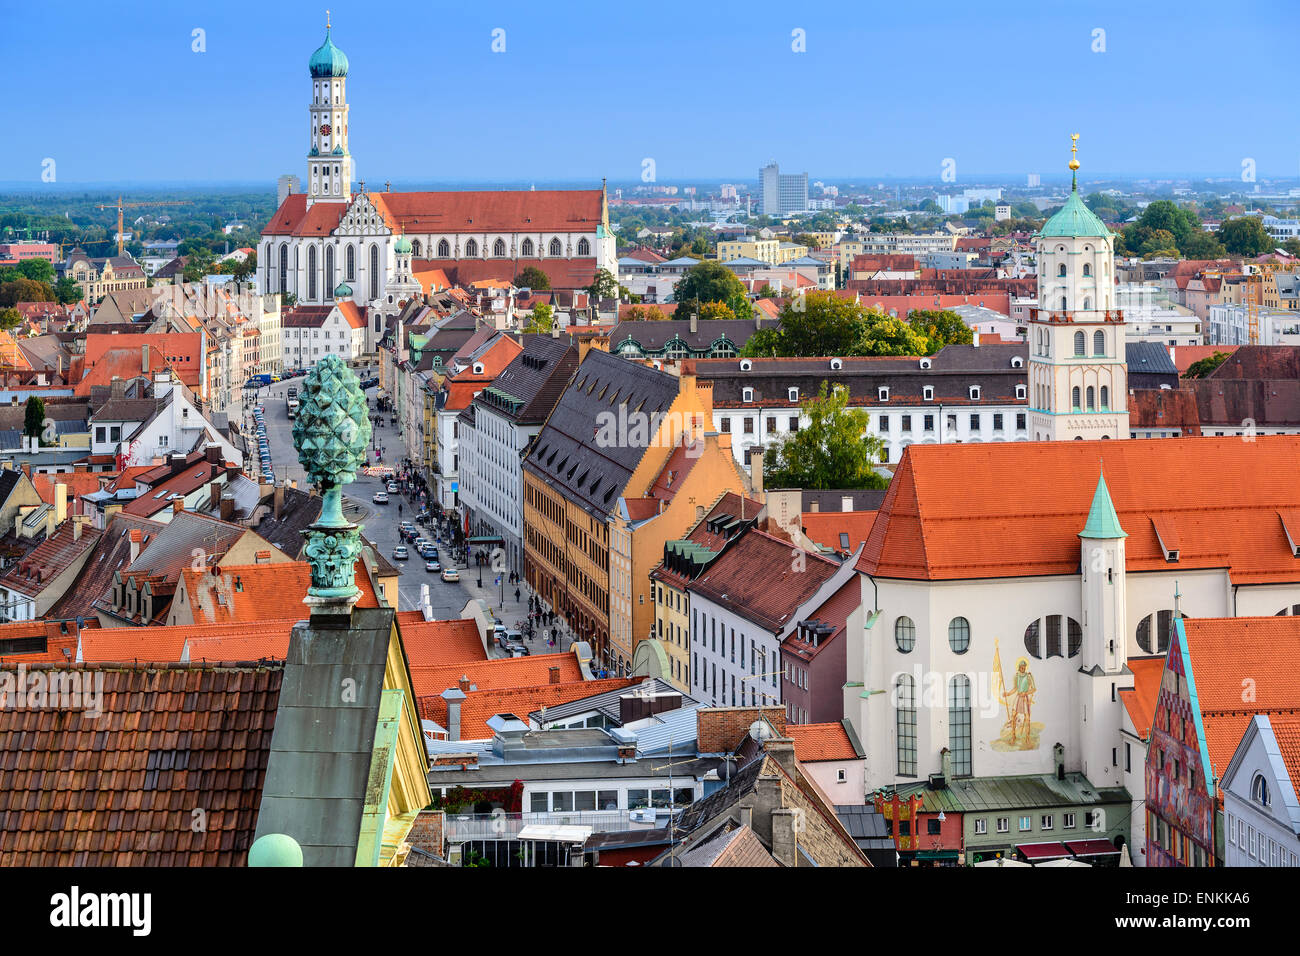 Augsburg, Germany old town skyline. Stock Photo